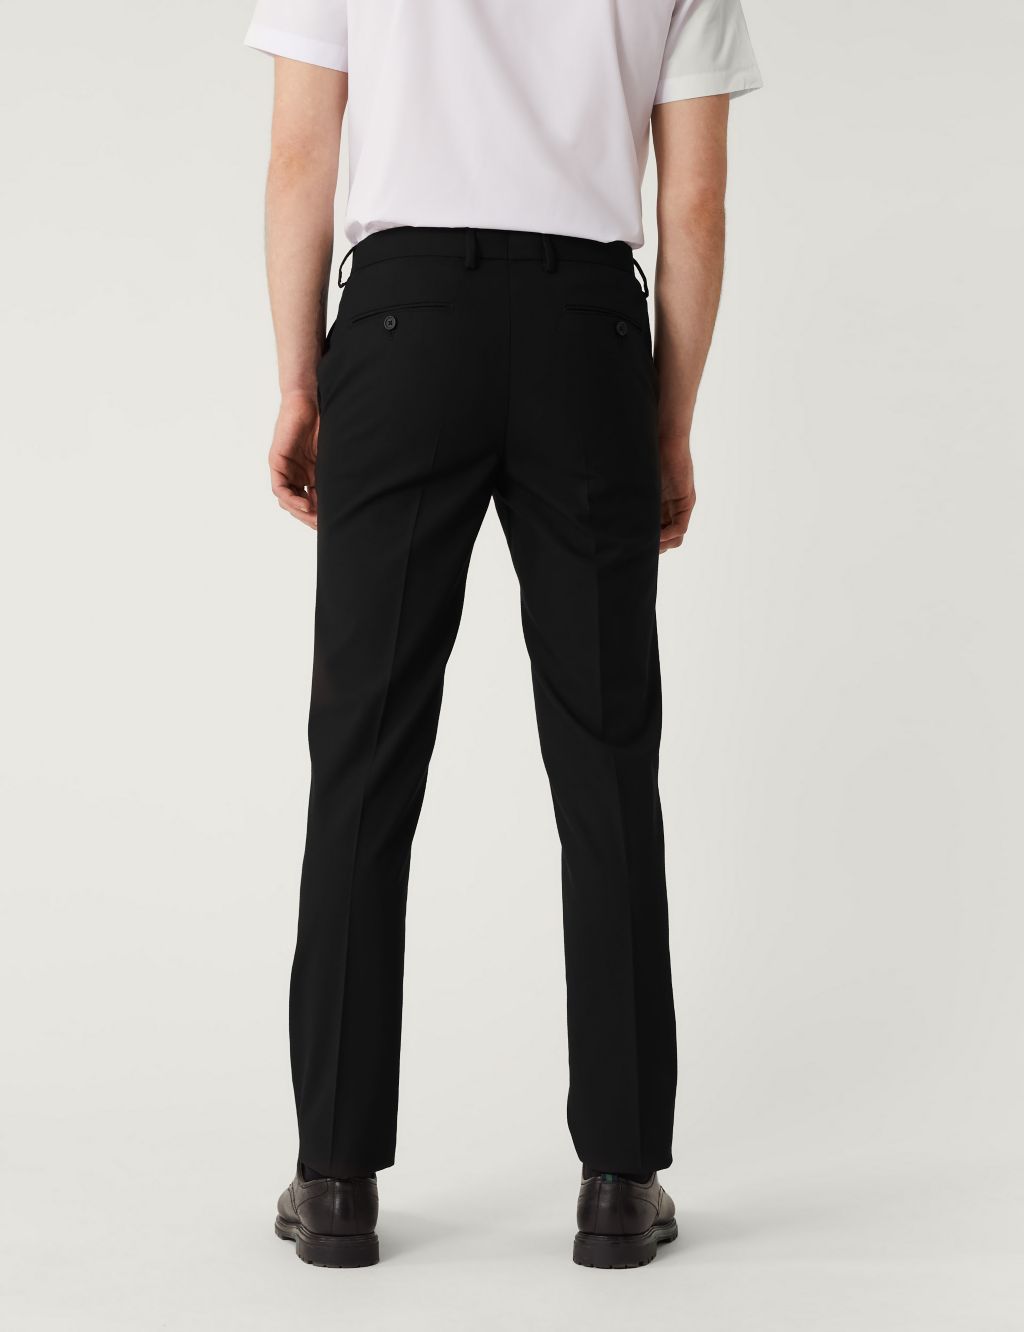 Tailored Fit Flat Front Stretch Trousers image 4